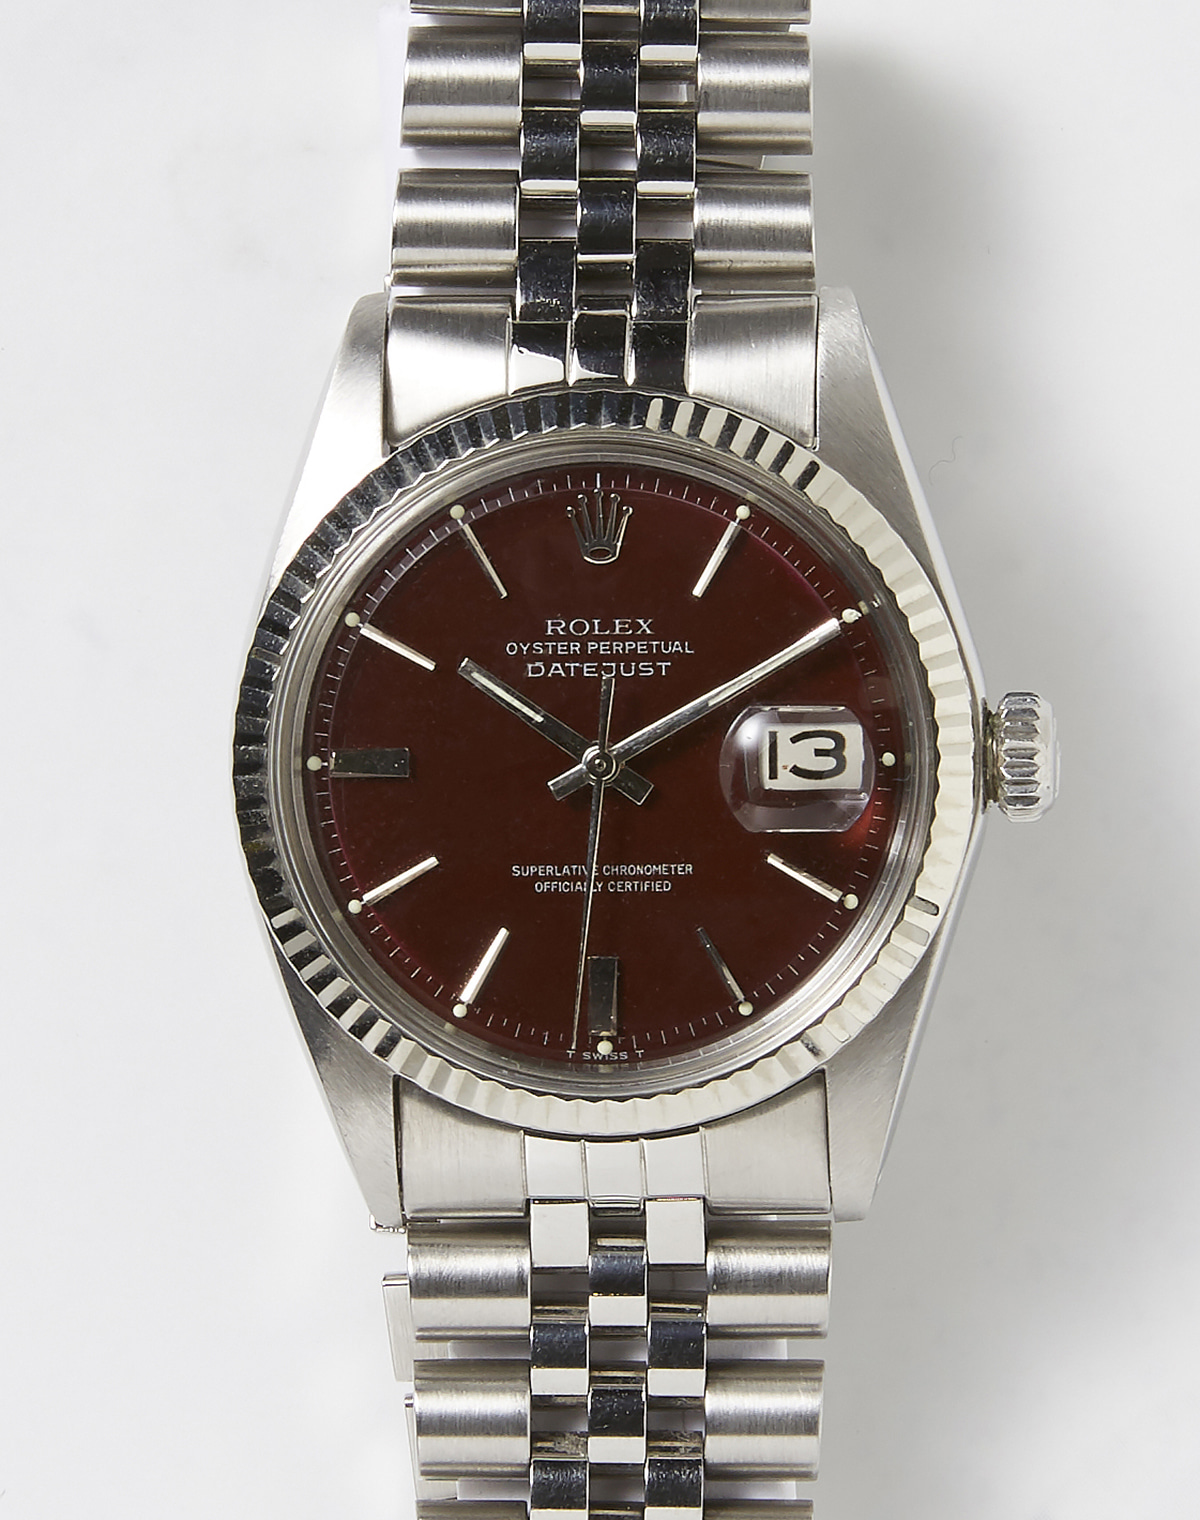 ROLEX OYSTER PERPETUAL DATEJUST 1601